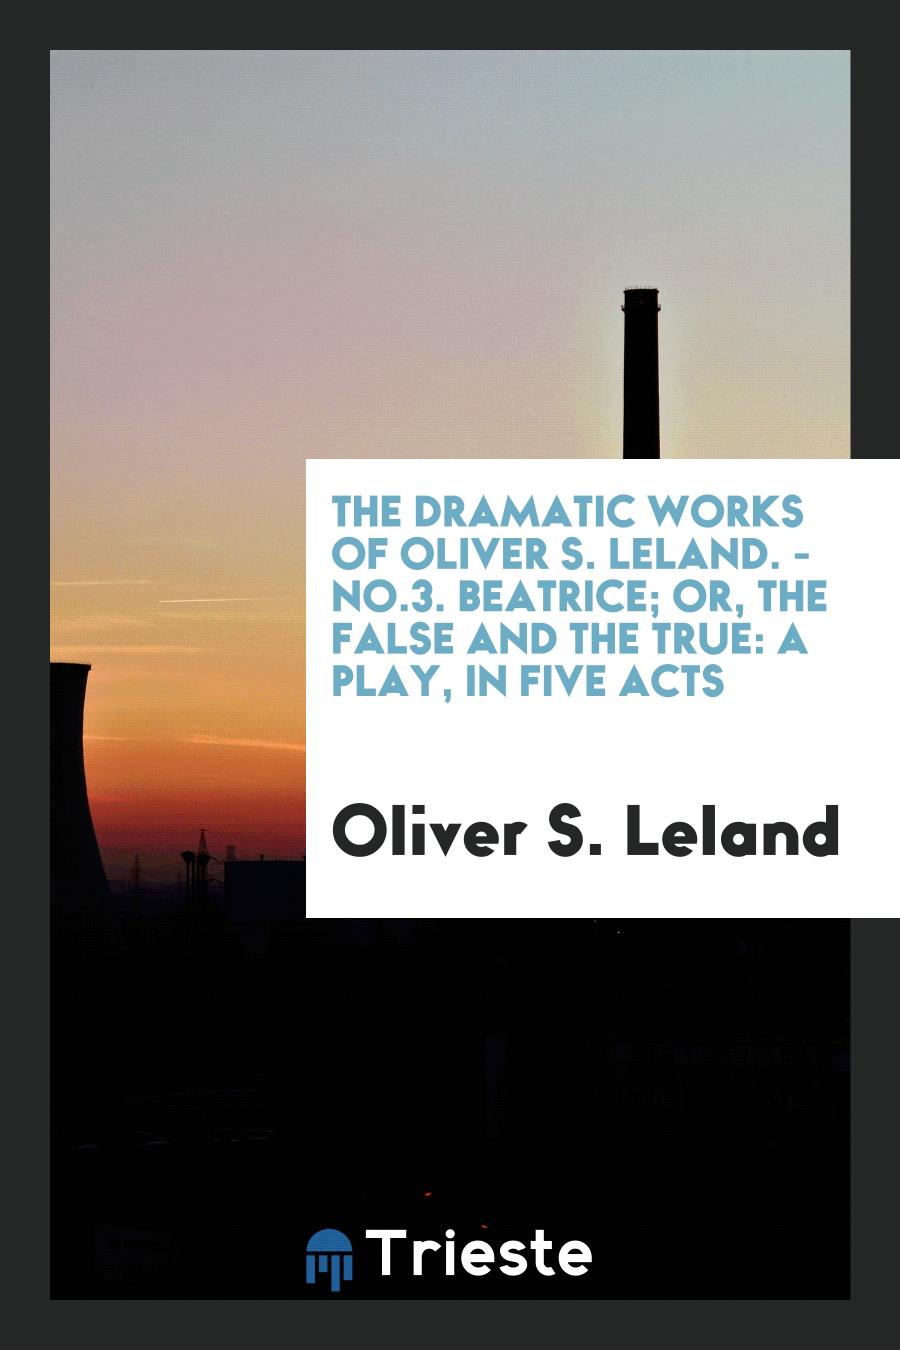 The dramatic works of Oliver S. Leland. - No.3. Beatrice; Or, The False and the True: A Play, in Five Acts